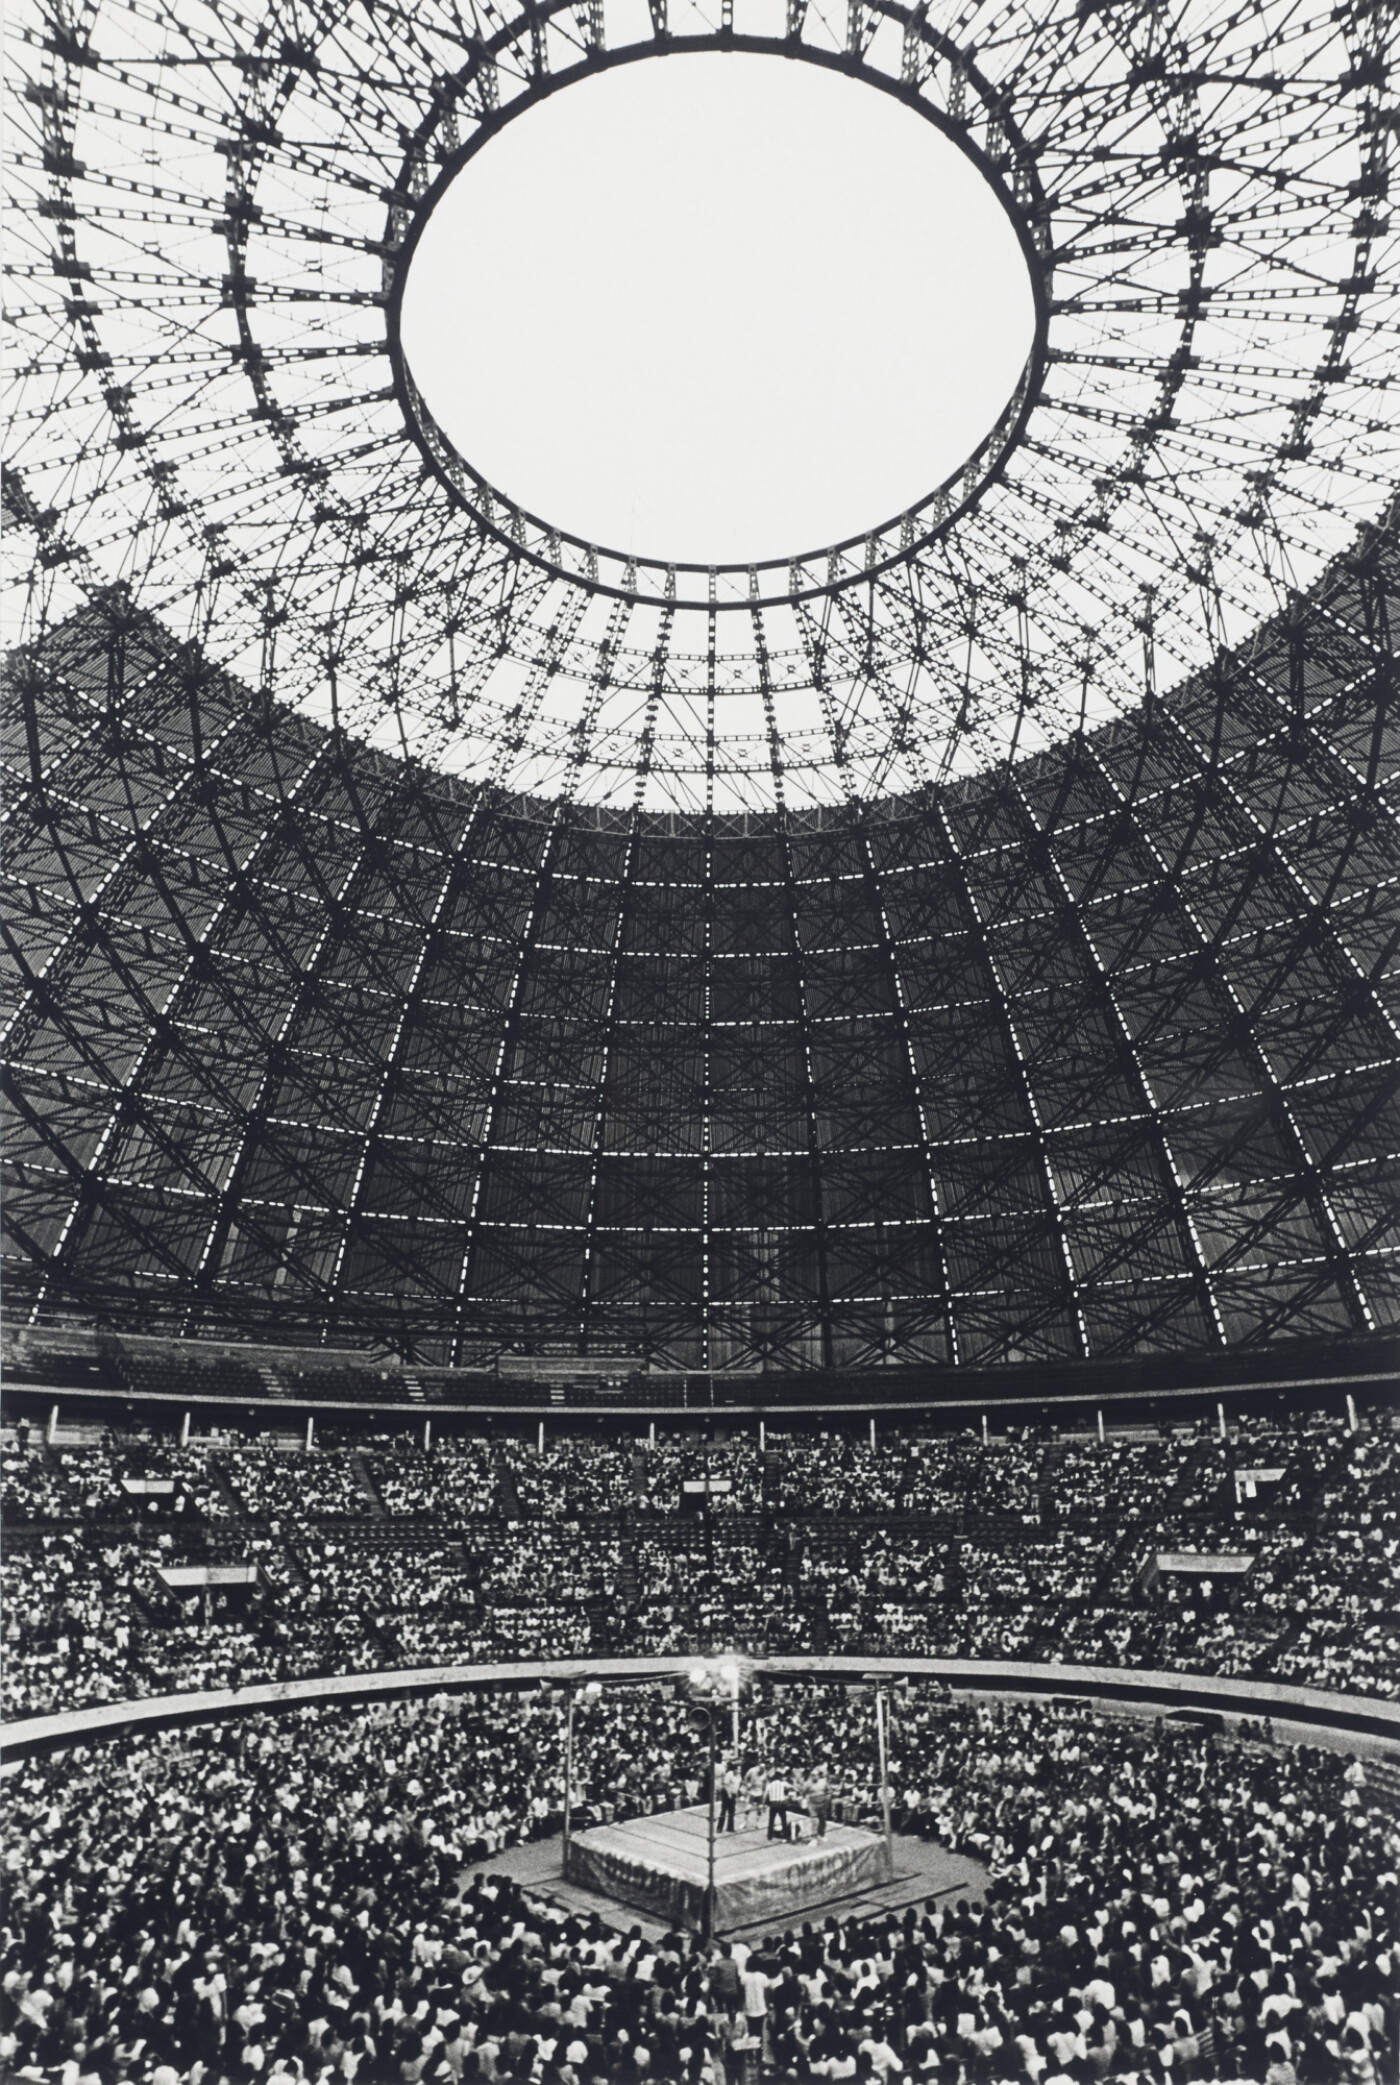 A black-and-white vertical photograph depicts a domed open-air arena shot from within. Two thirds of the composition are dominated by the concentric metal armatures of the arena’s architecture. At the center of the top edge of the photograph is an oculus through which light pours into the space. The audience fills the bottom third of the photograph, their attention fixed on a wrestling ring centered on the bottom edge.